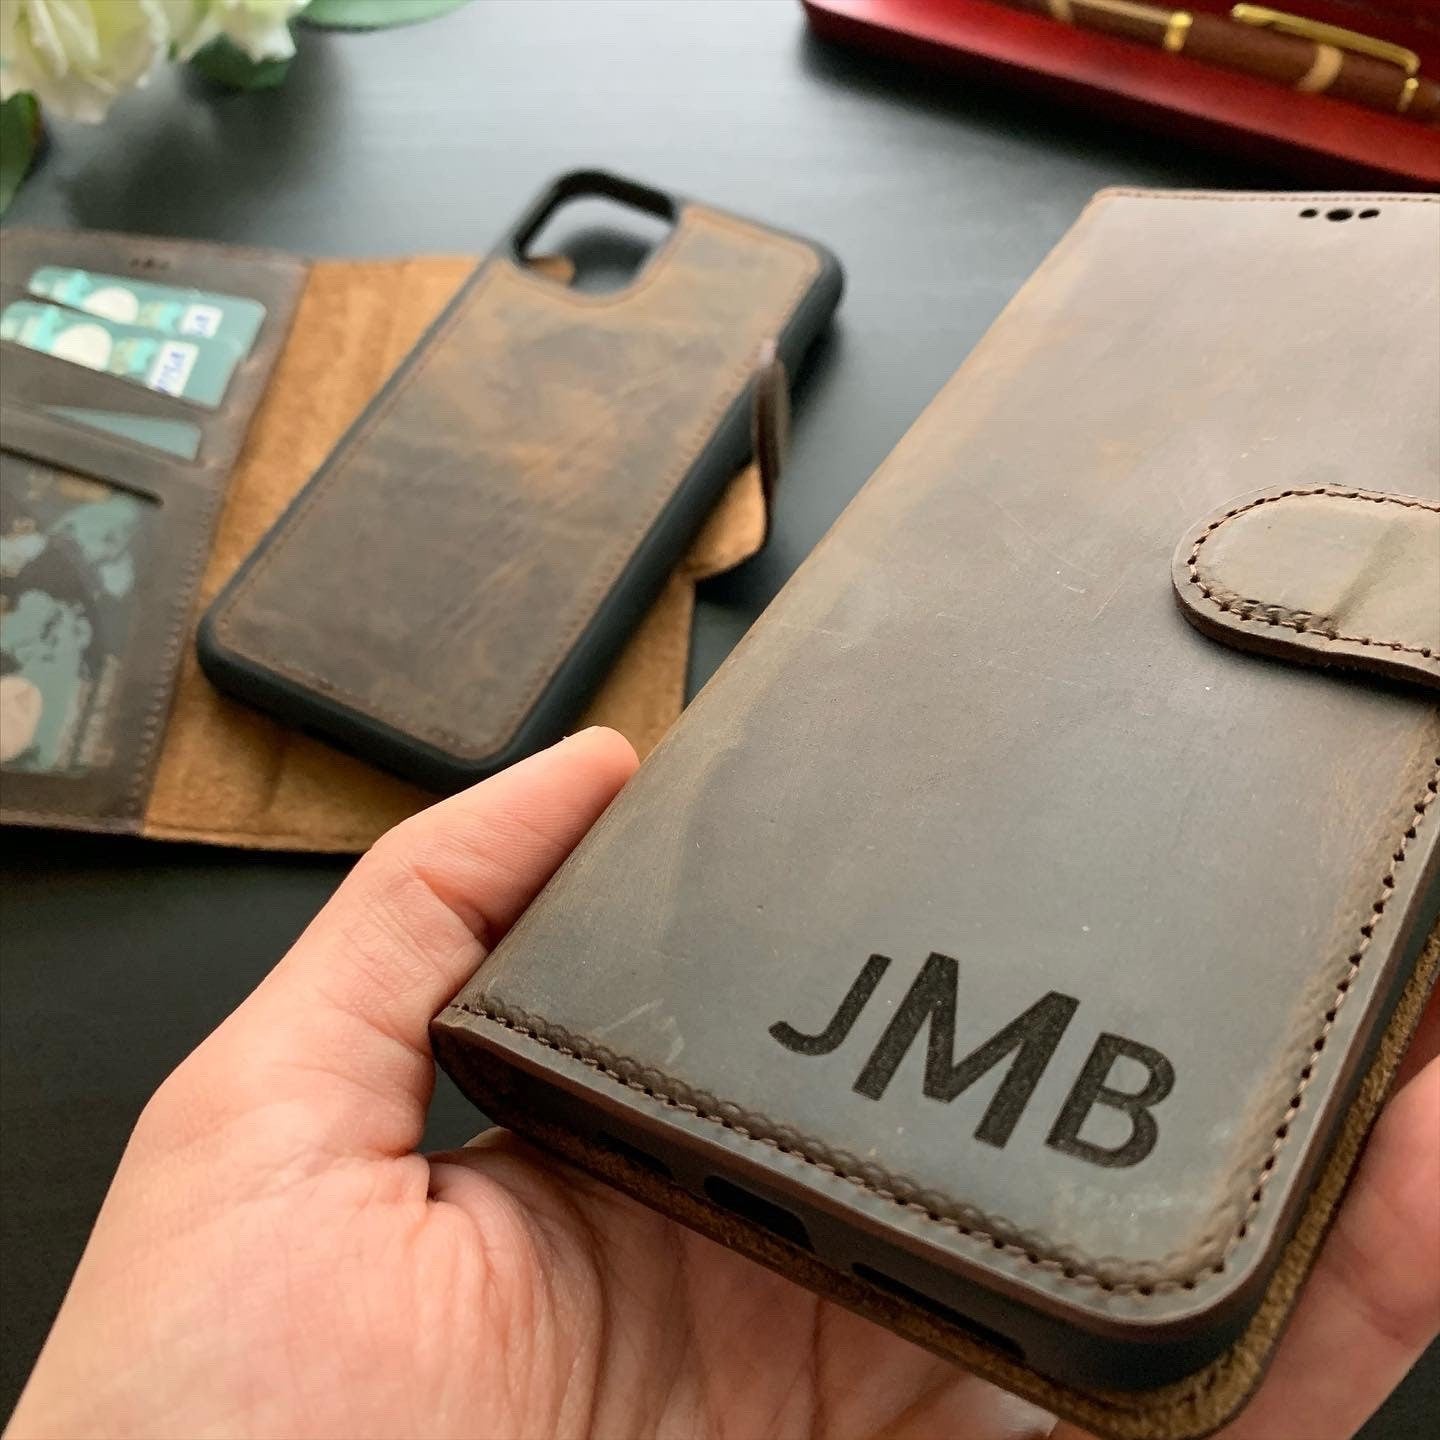 Iphone 13 Pro max case, Leather wallet, Iphone 12 case, 100% Leather Wallet Case, iPhone Leather Wallet